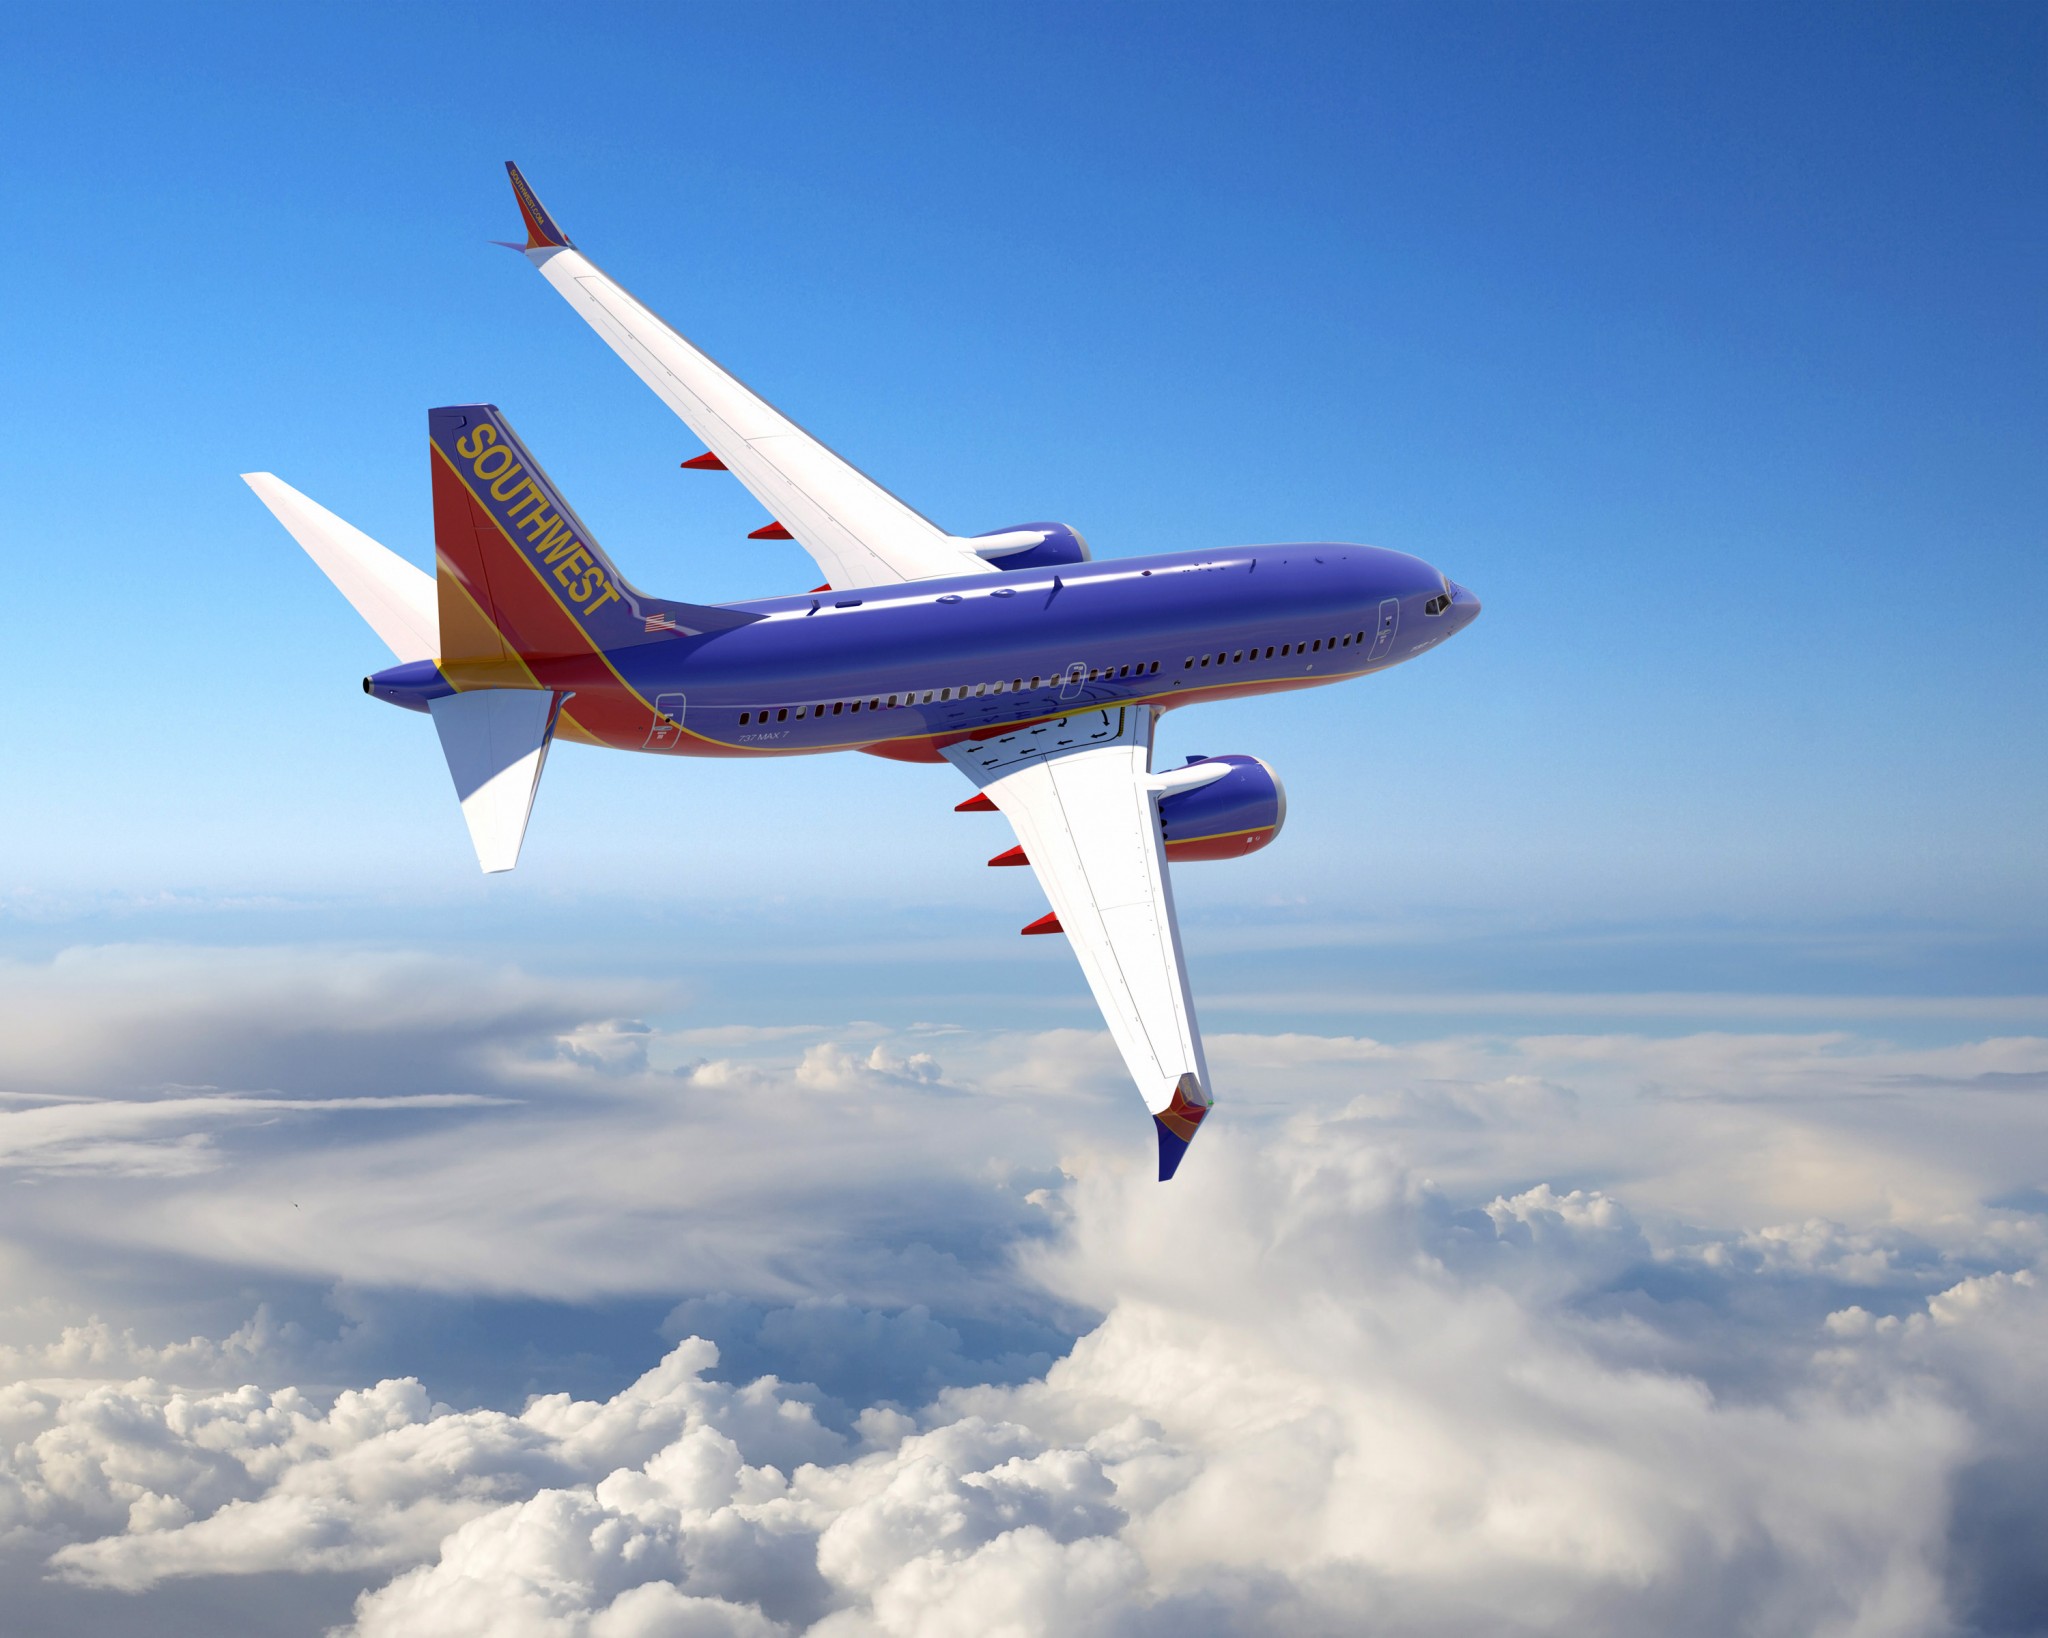 FAA and EASA emergency airworthiness directive leads to delays at Southwest